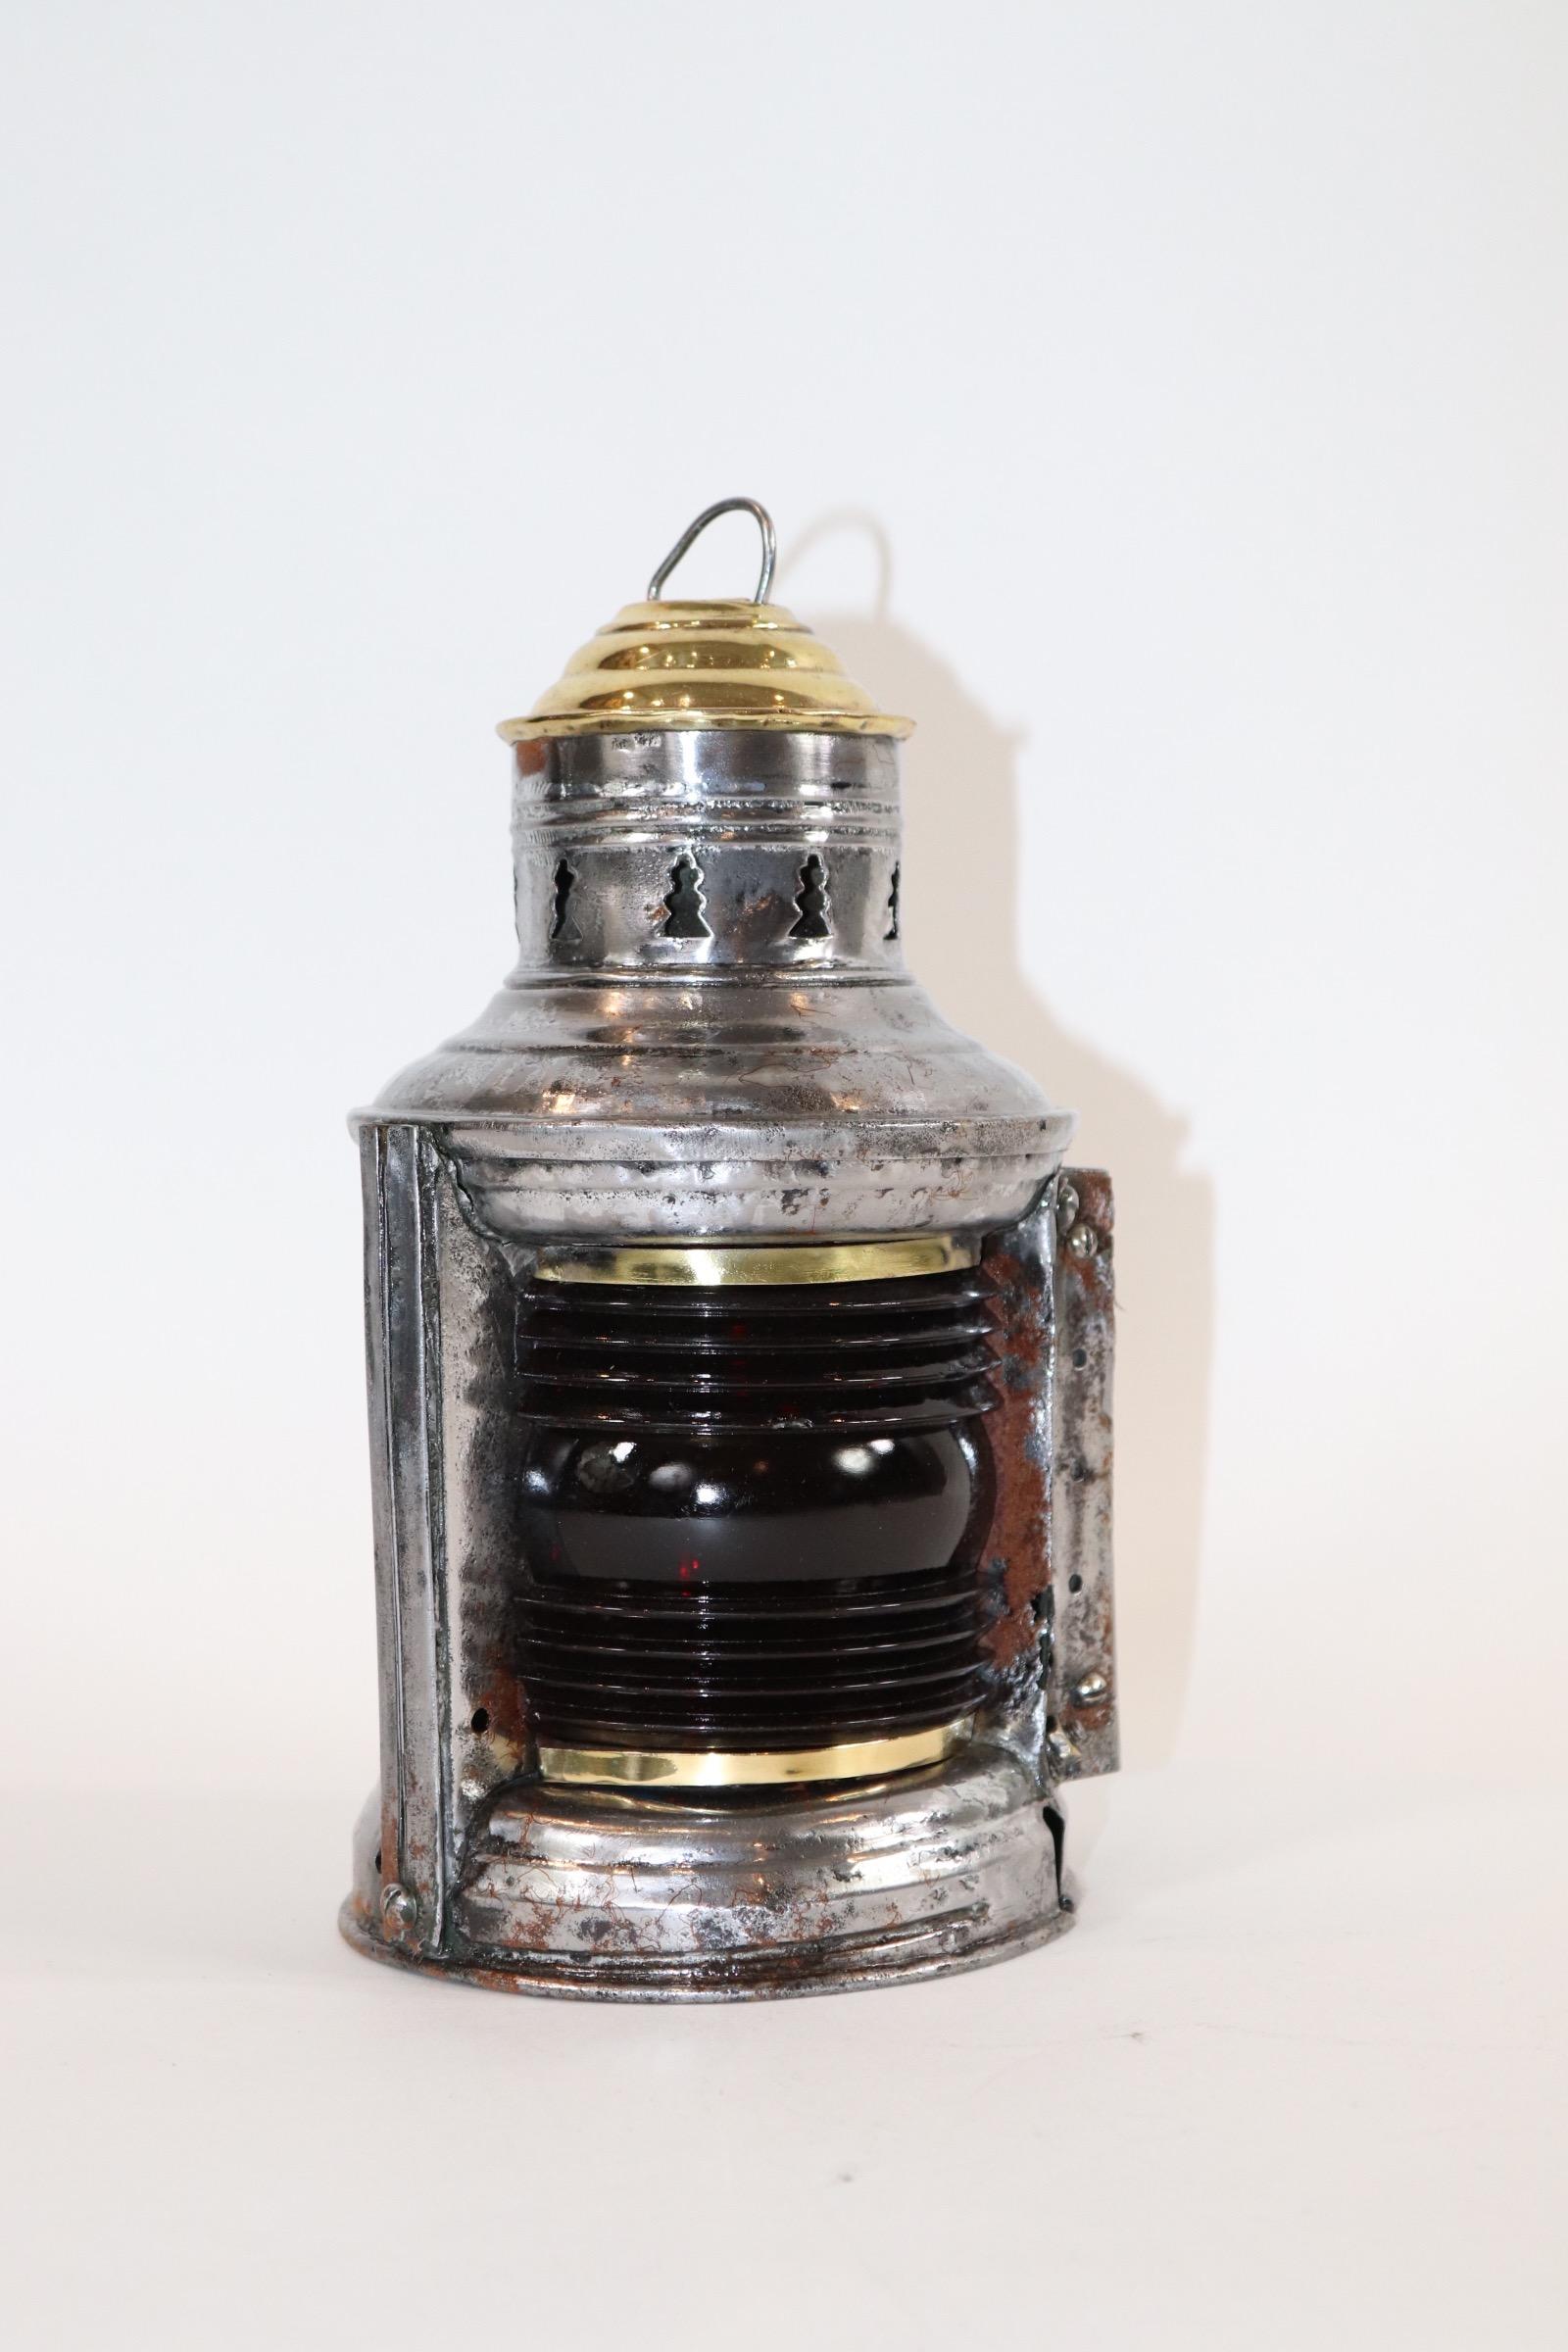 Polished steel marine bow lantern with port and starboard fresnel lenses, brass cap. Lacking its burner. Weight is 2 pounds.